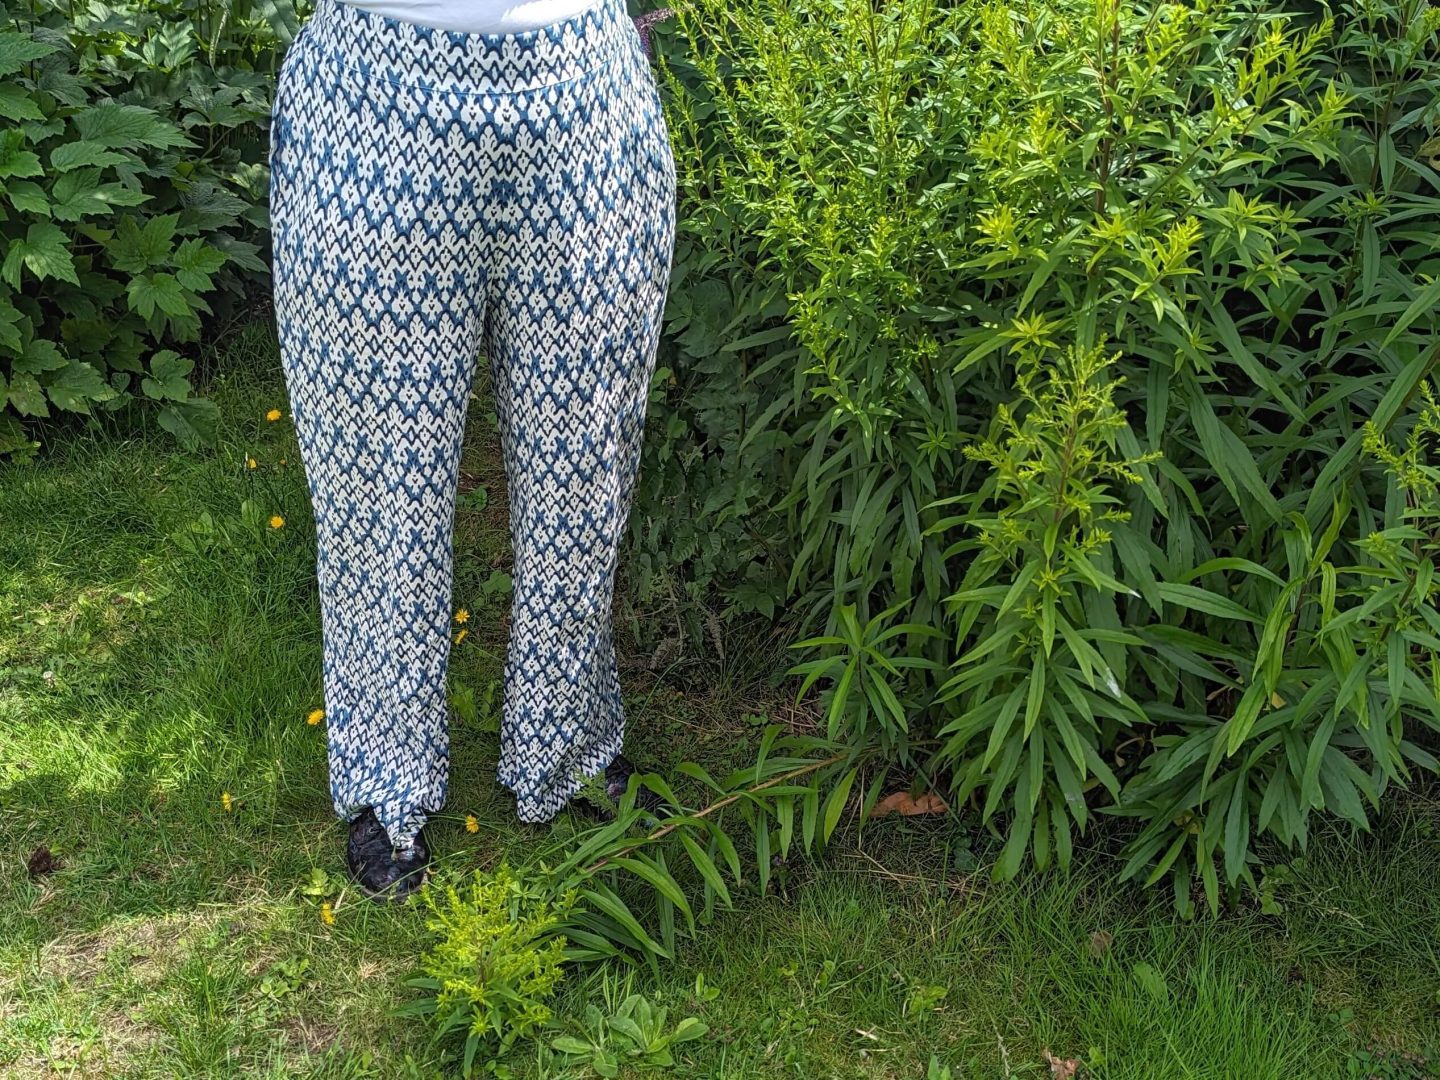 Natalie photographed from the waist down wearing Cotton Traders Jasmine Harman Collection blue and white printed trousers